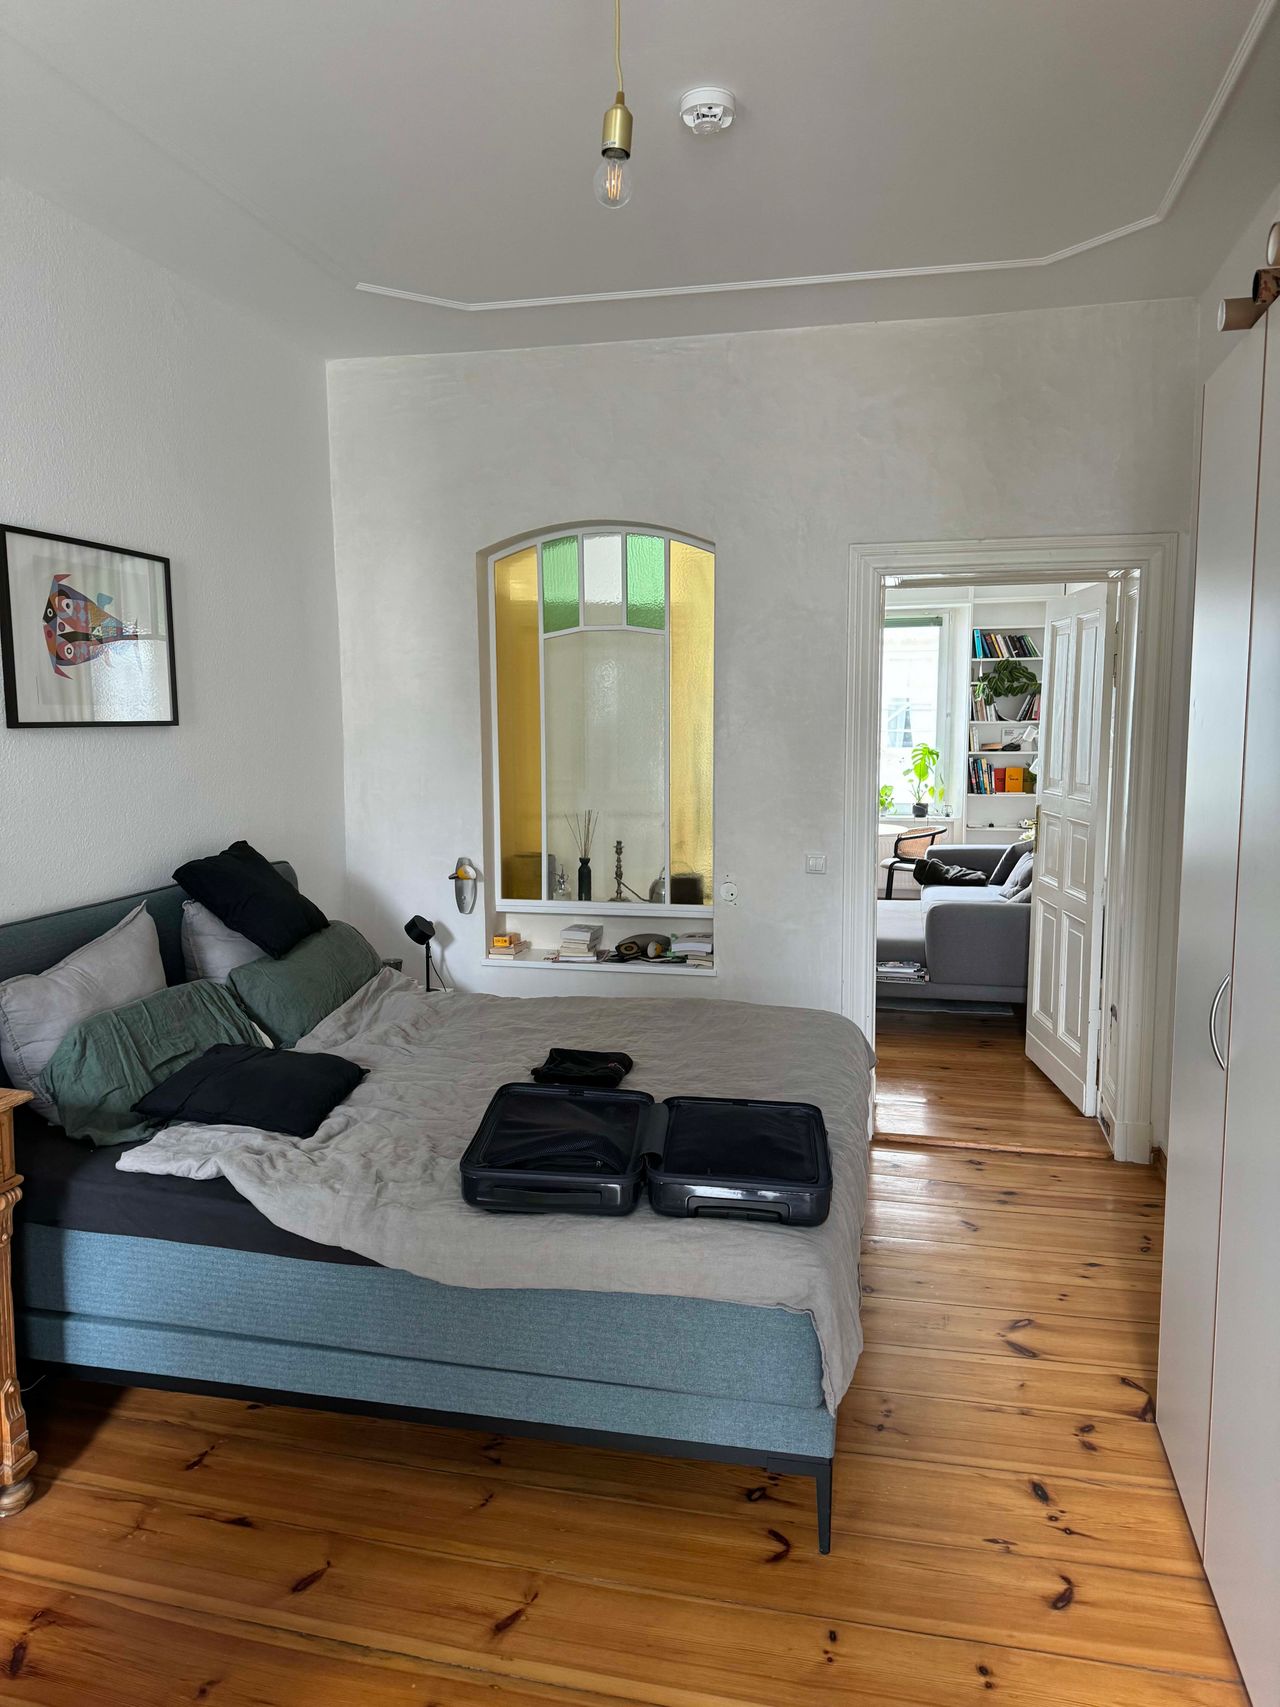 Charming 2-Room Apartment in Berlin Prenzlauer Berg for Sublet